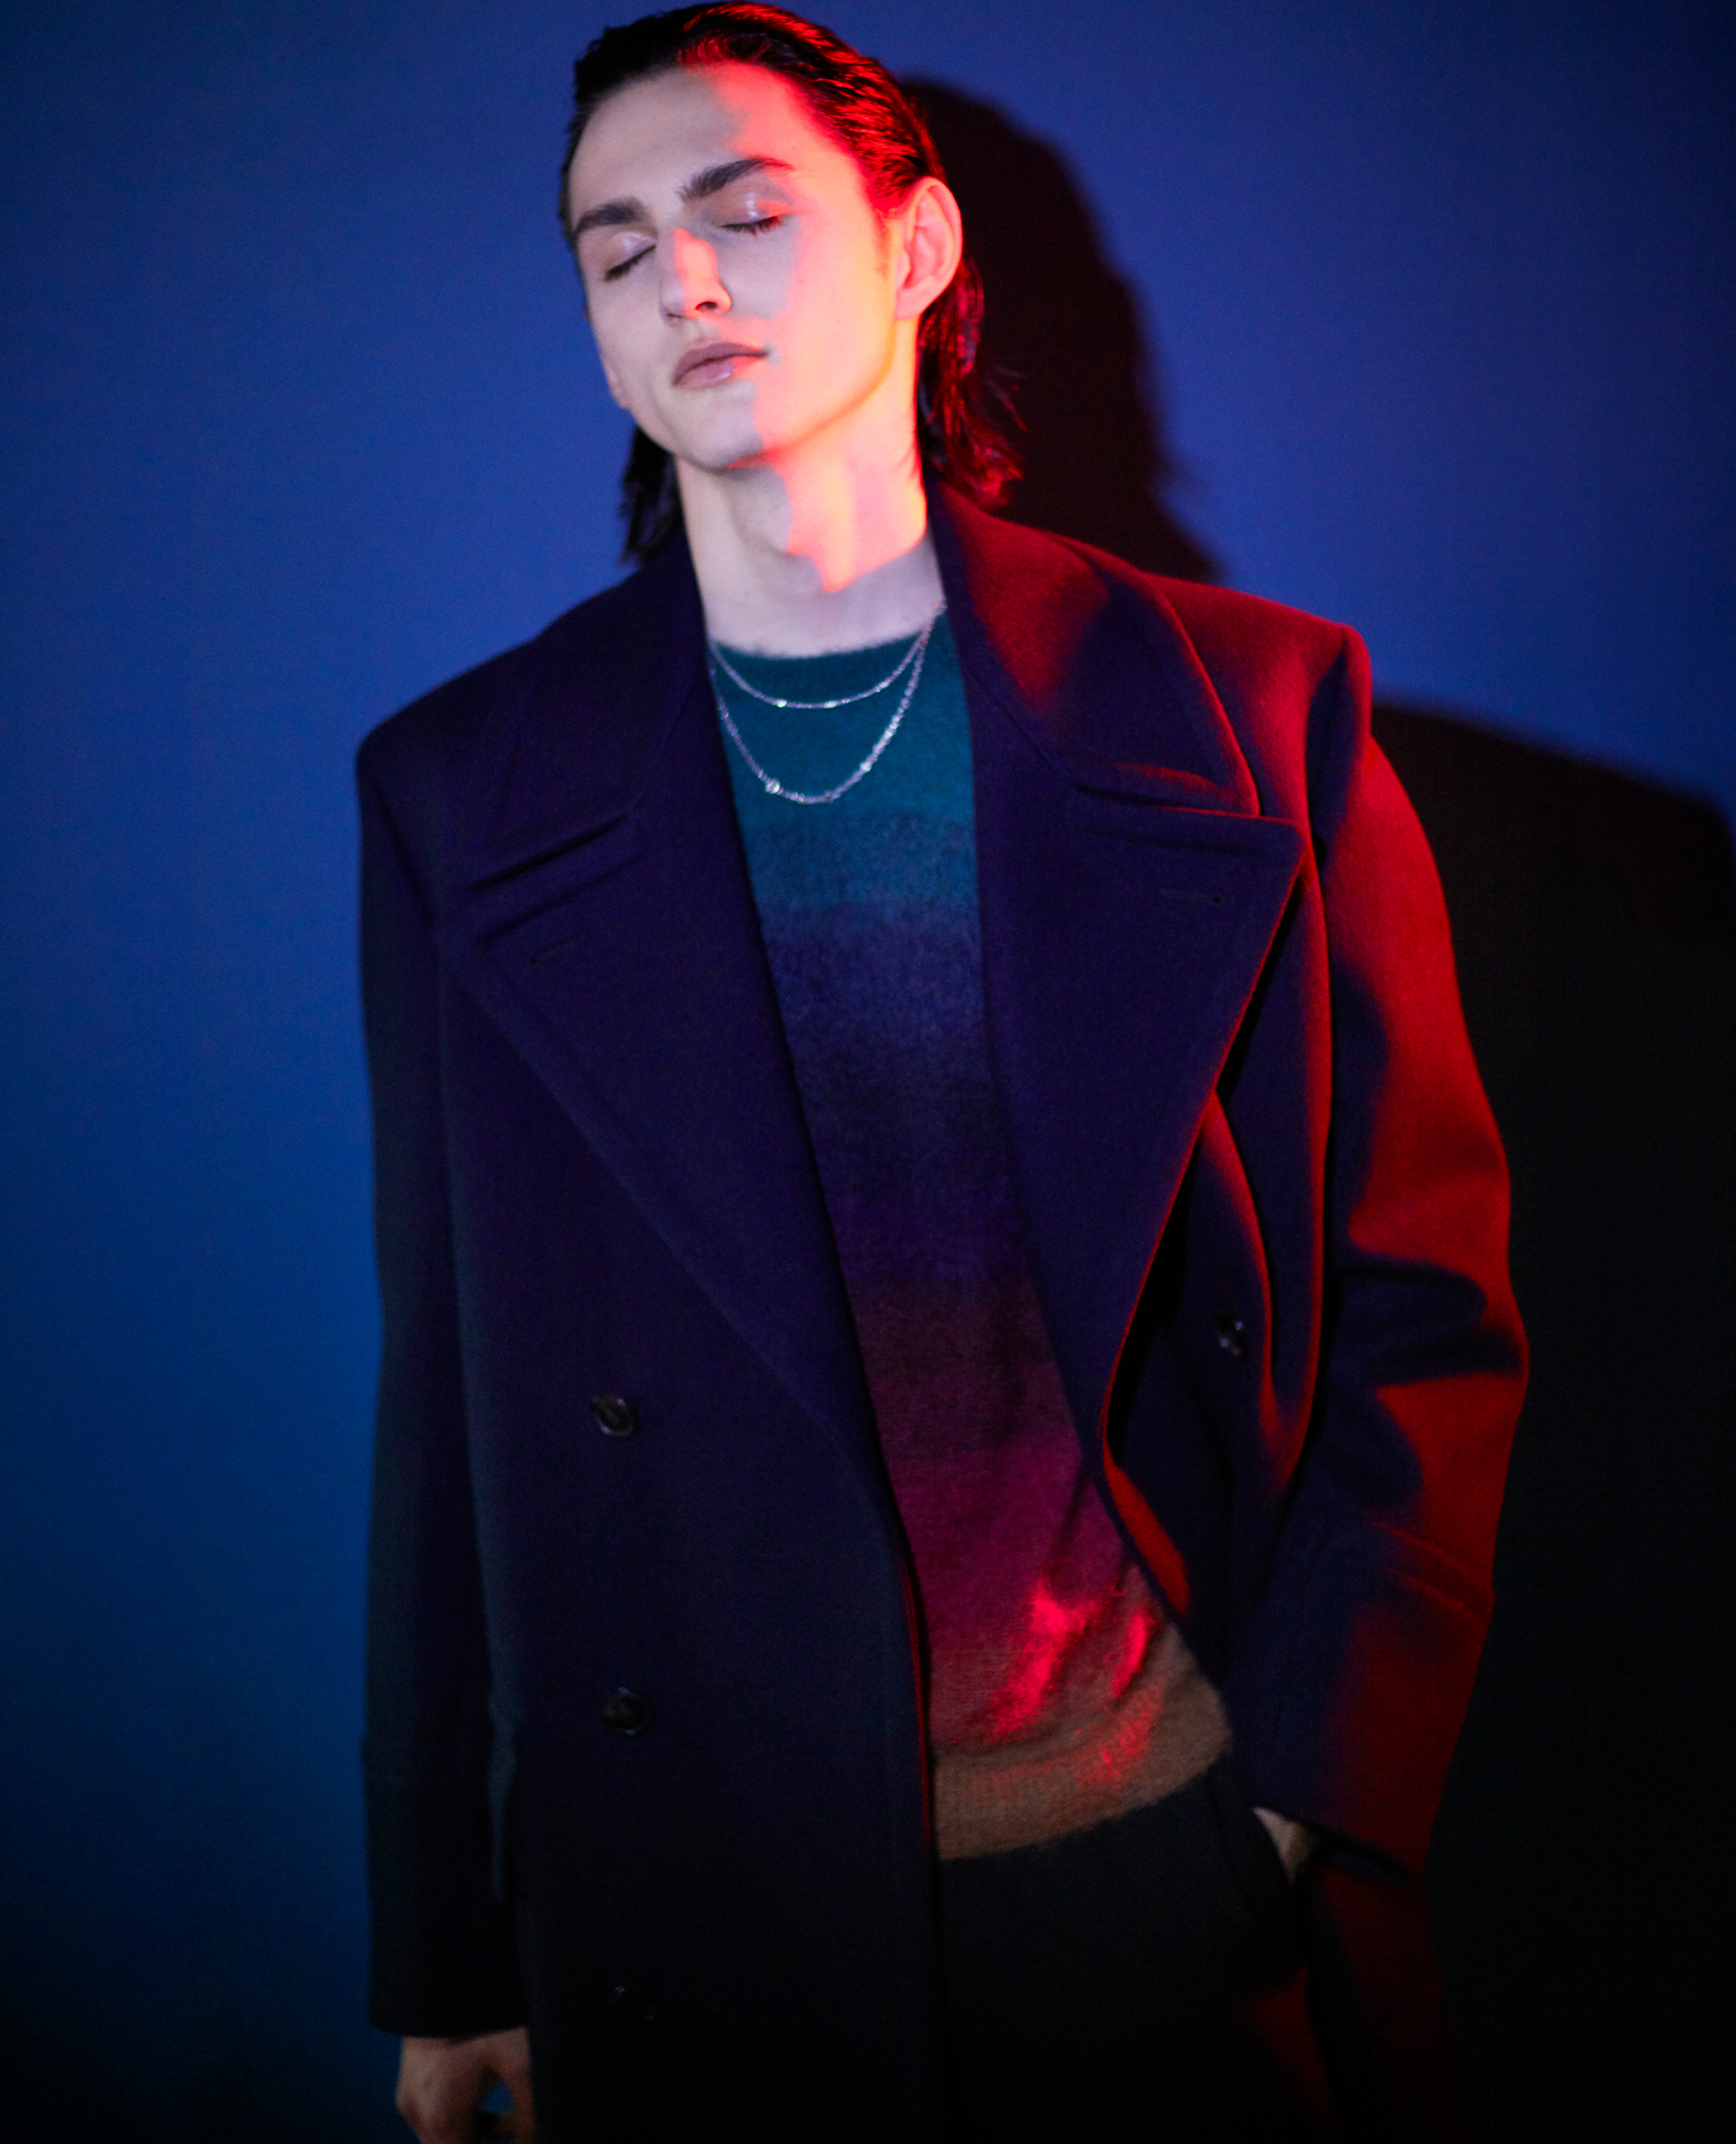 Paul Smith – AW18 Collection -